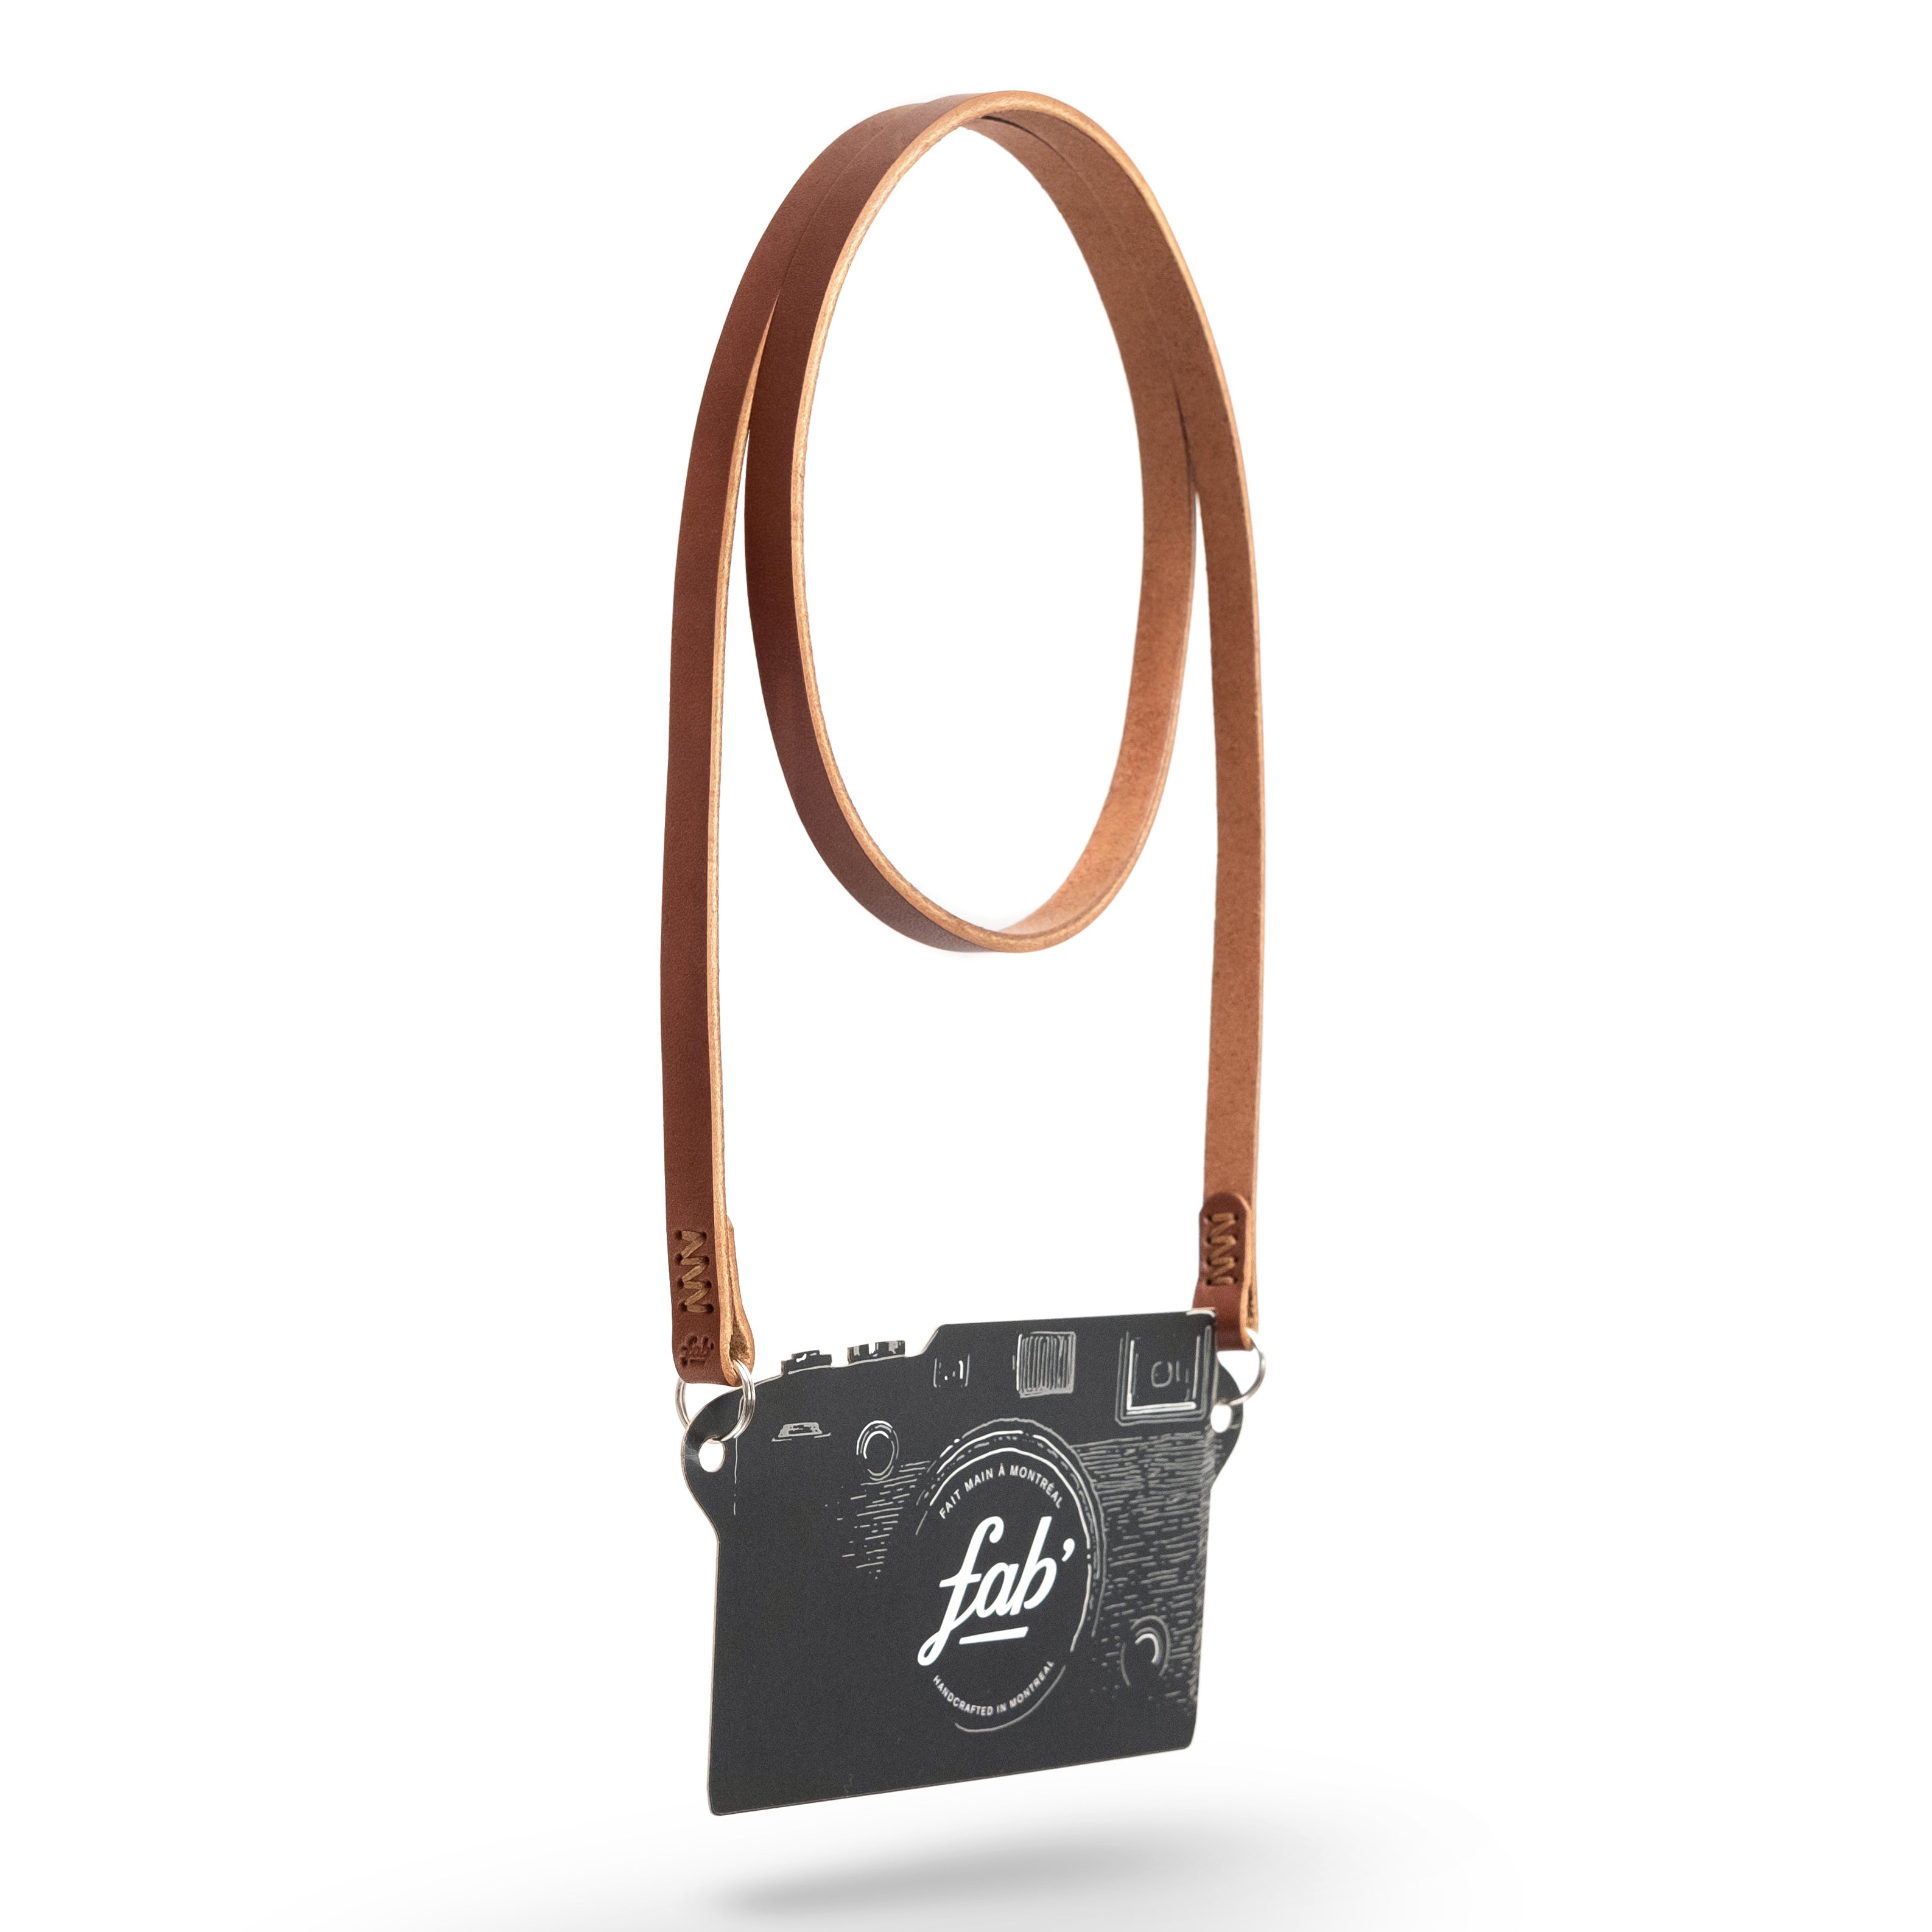 Fab' F4 strap - Brown leather - Size S (39")